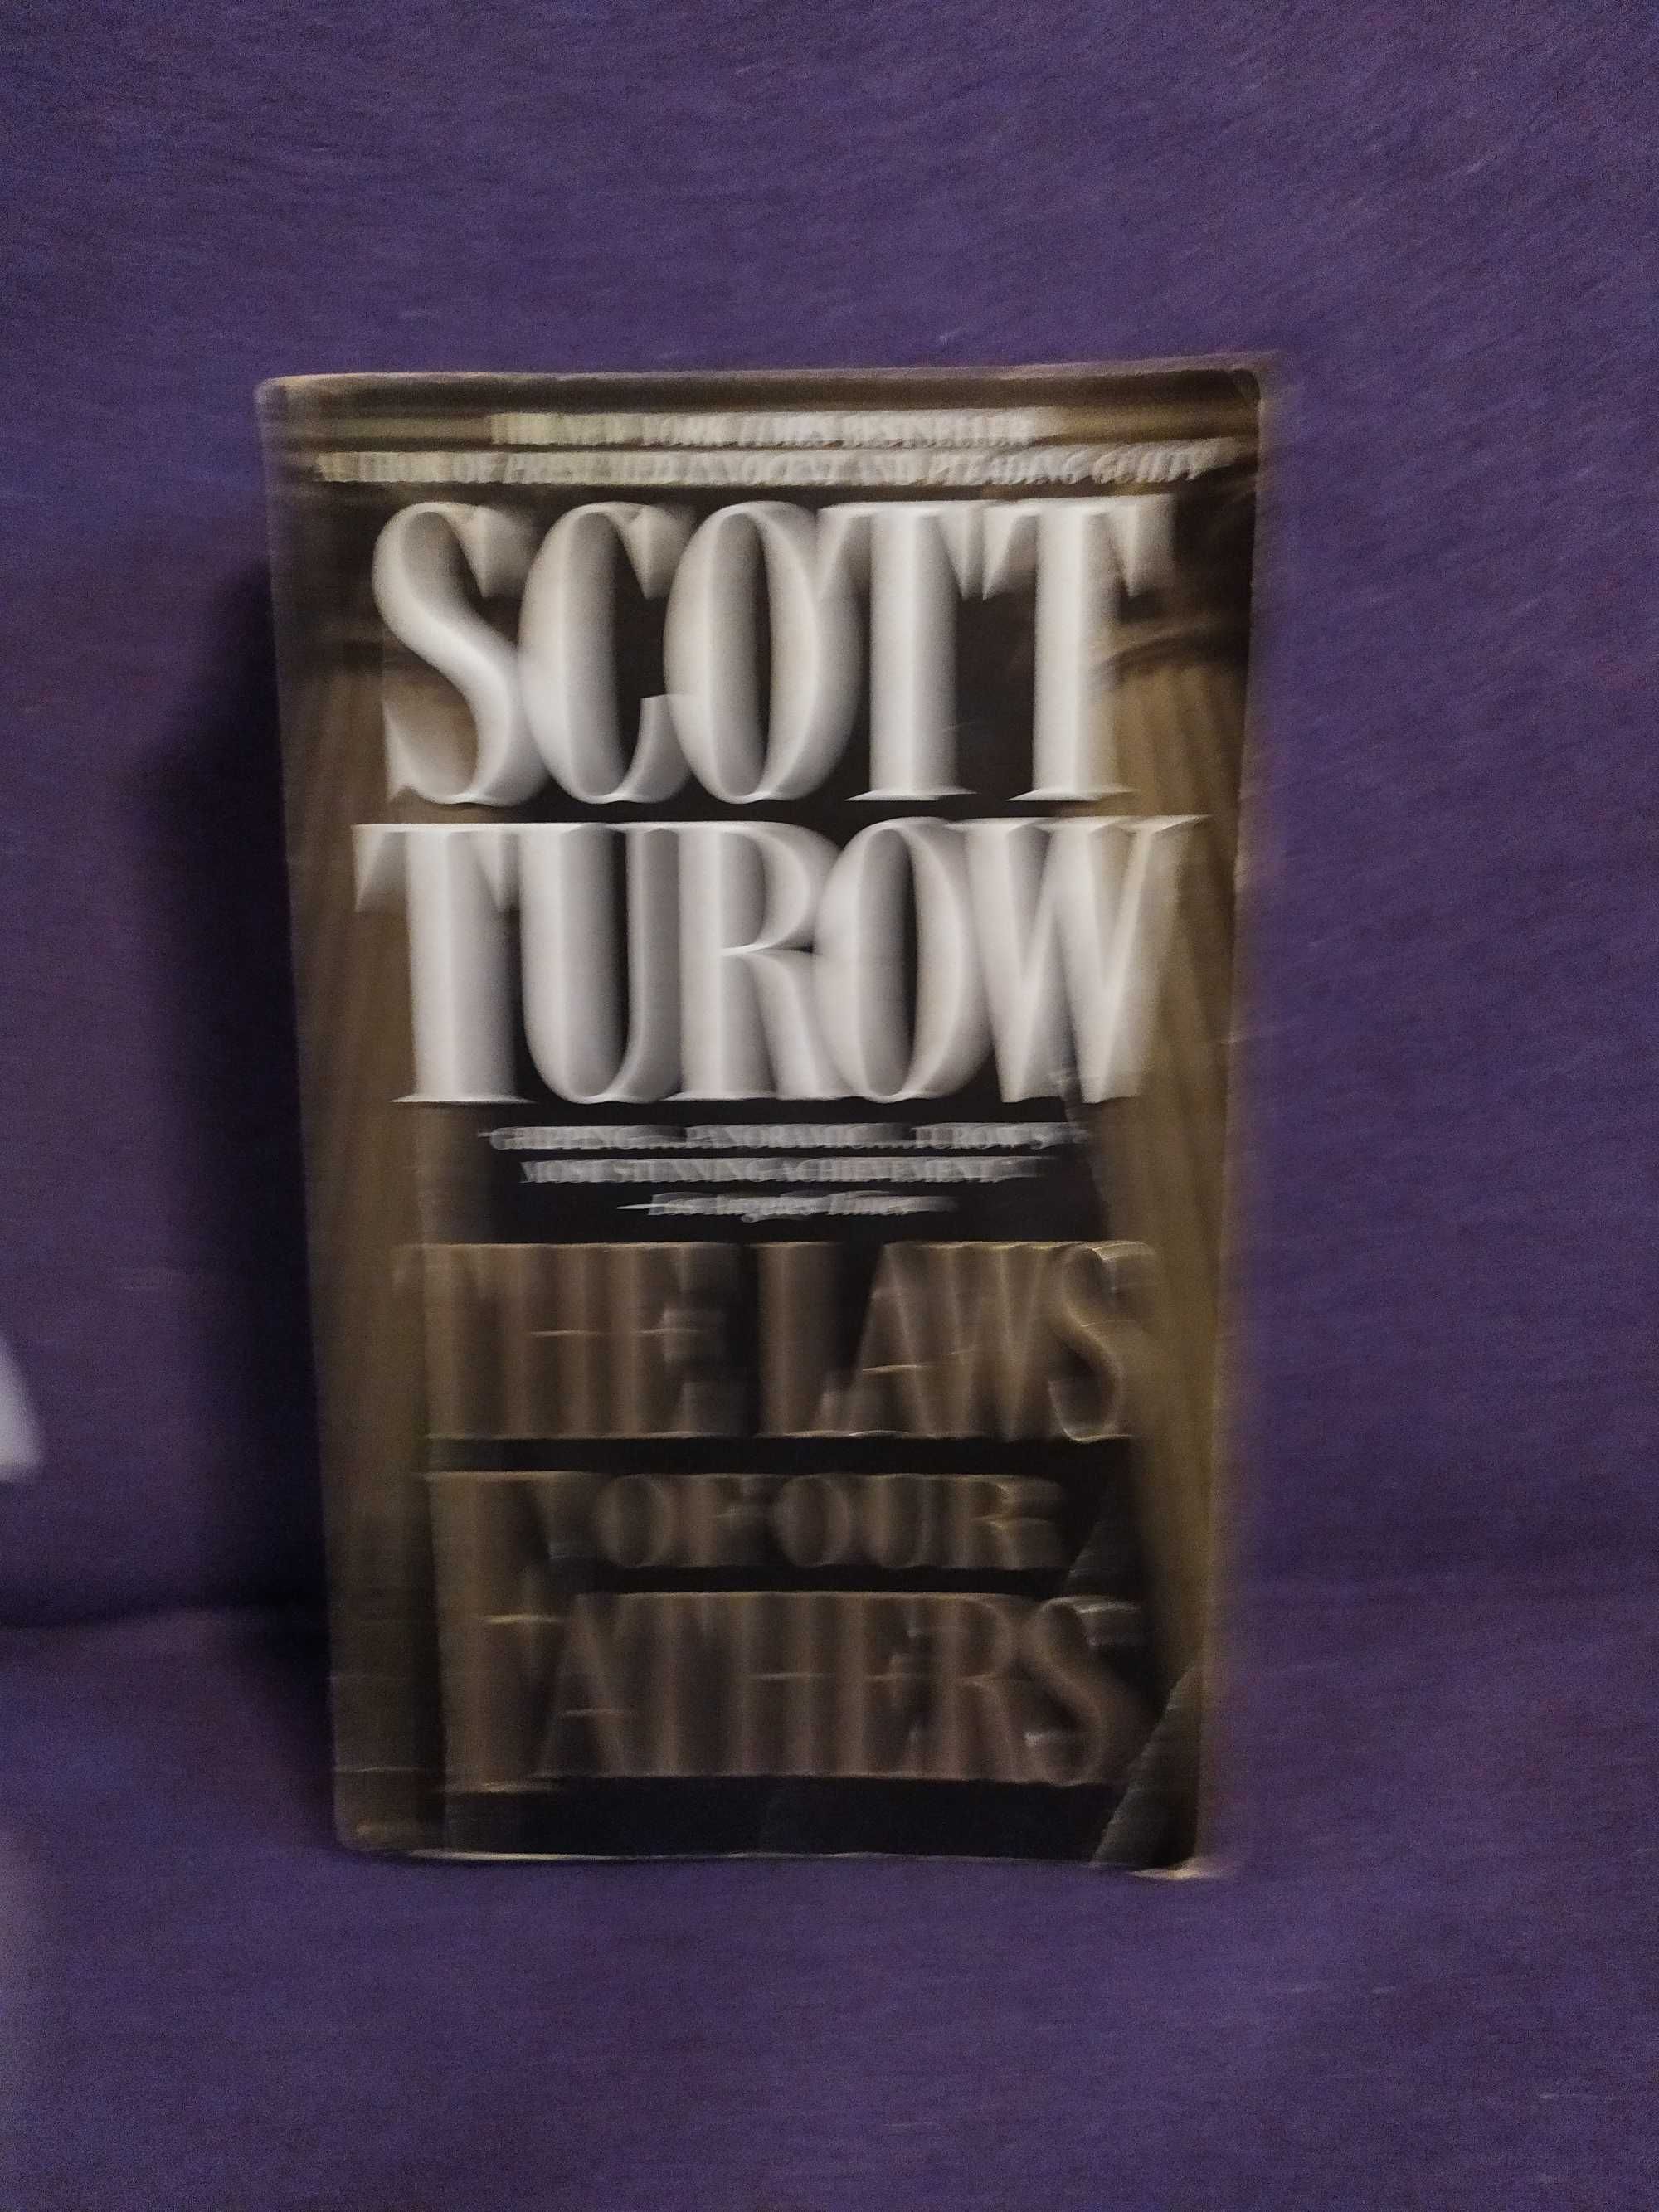 The laws of our Father - Scott Turow